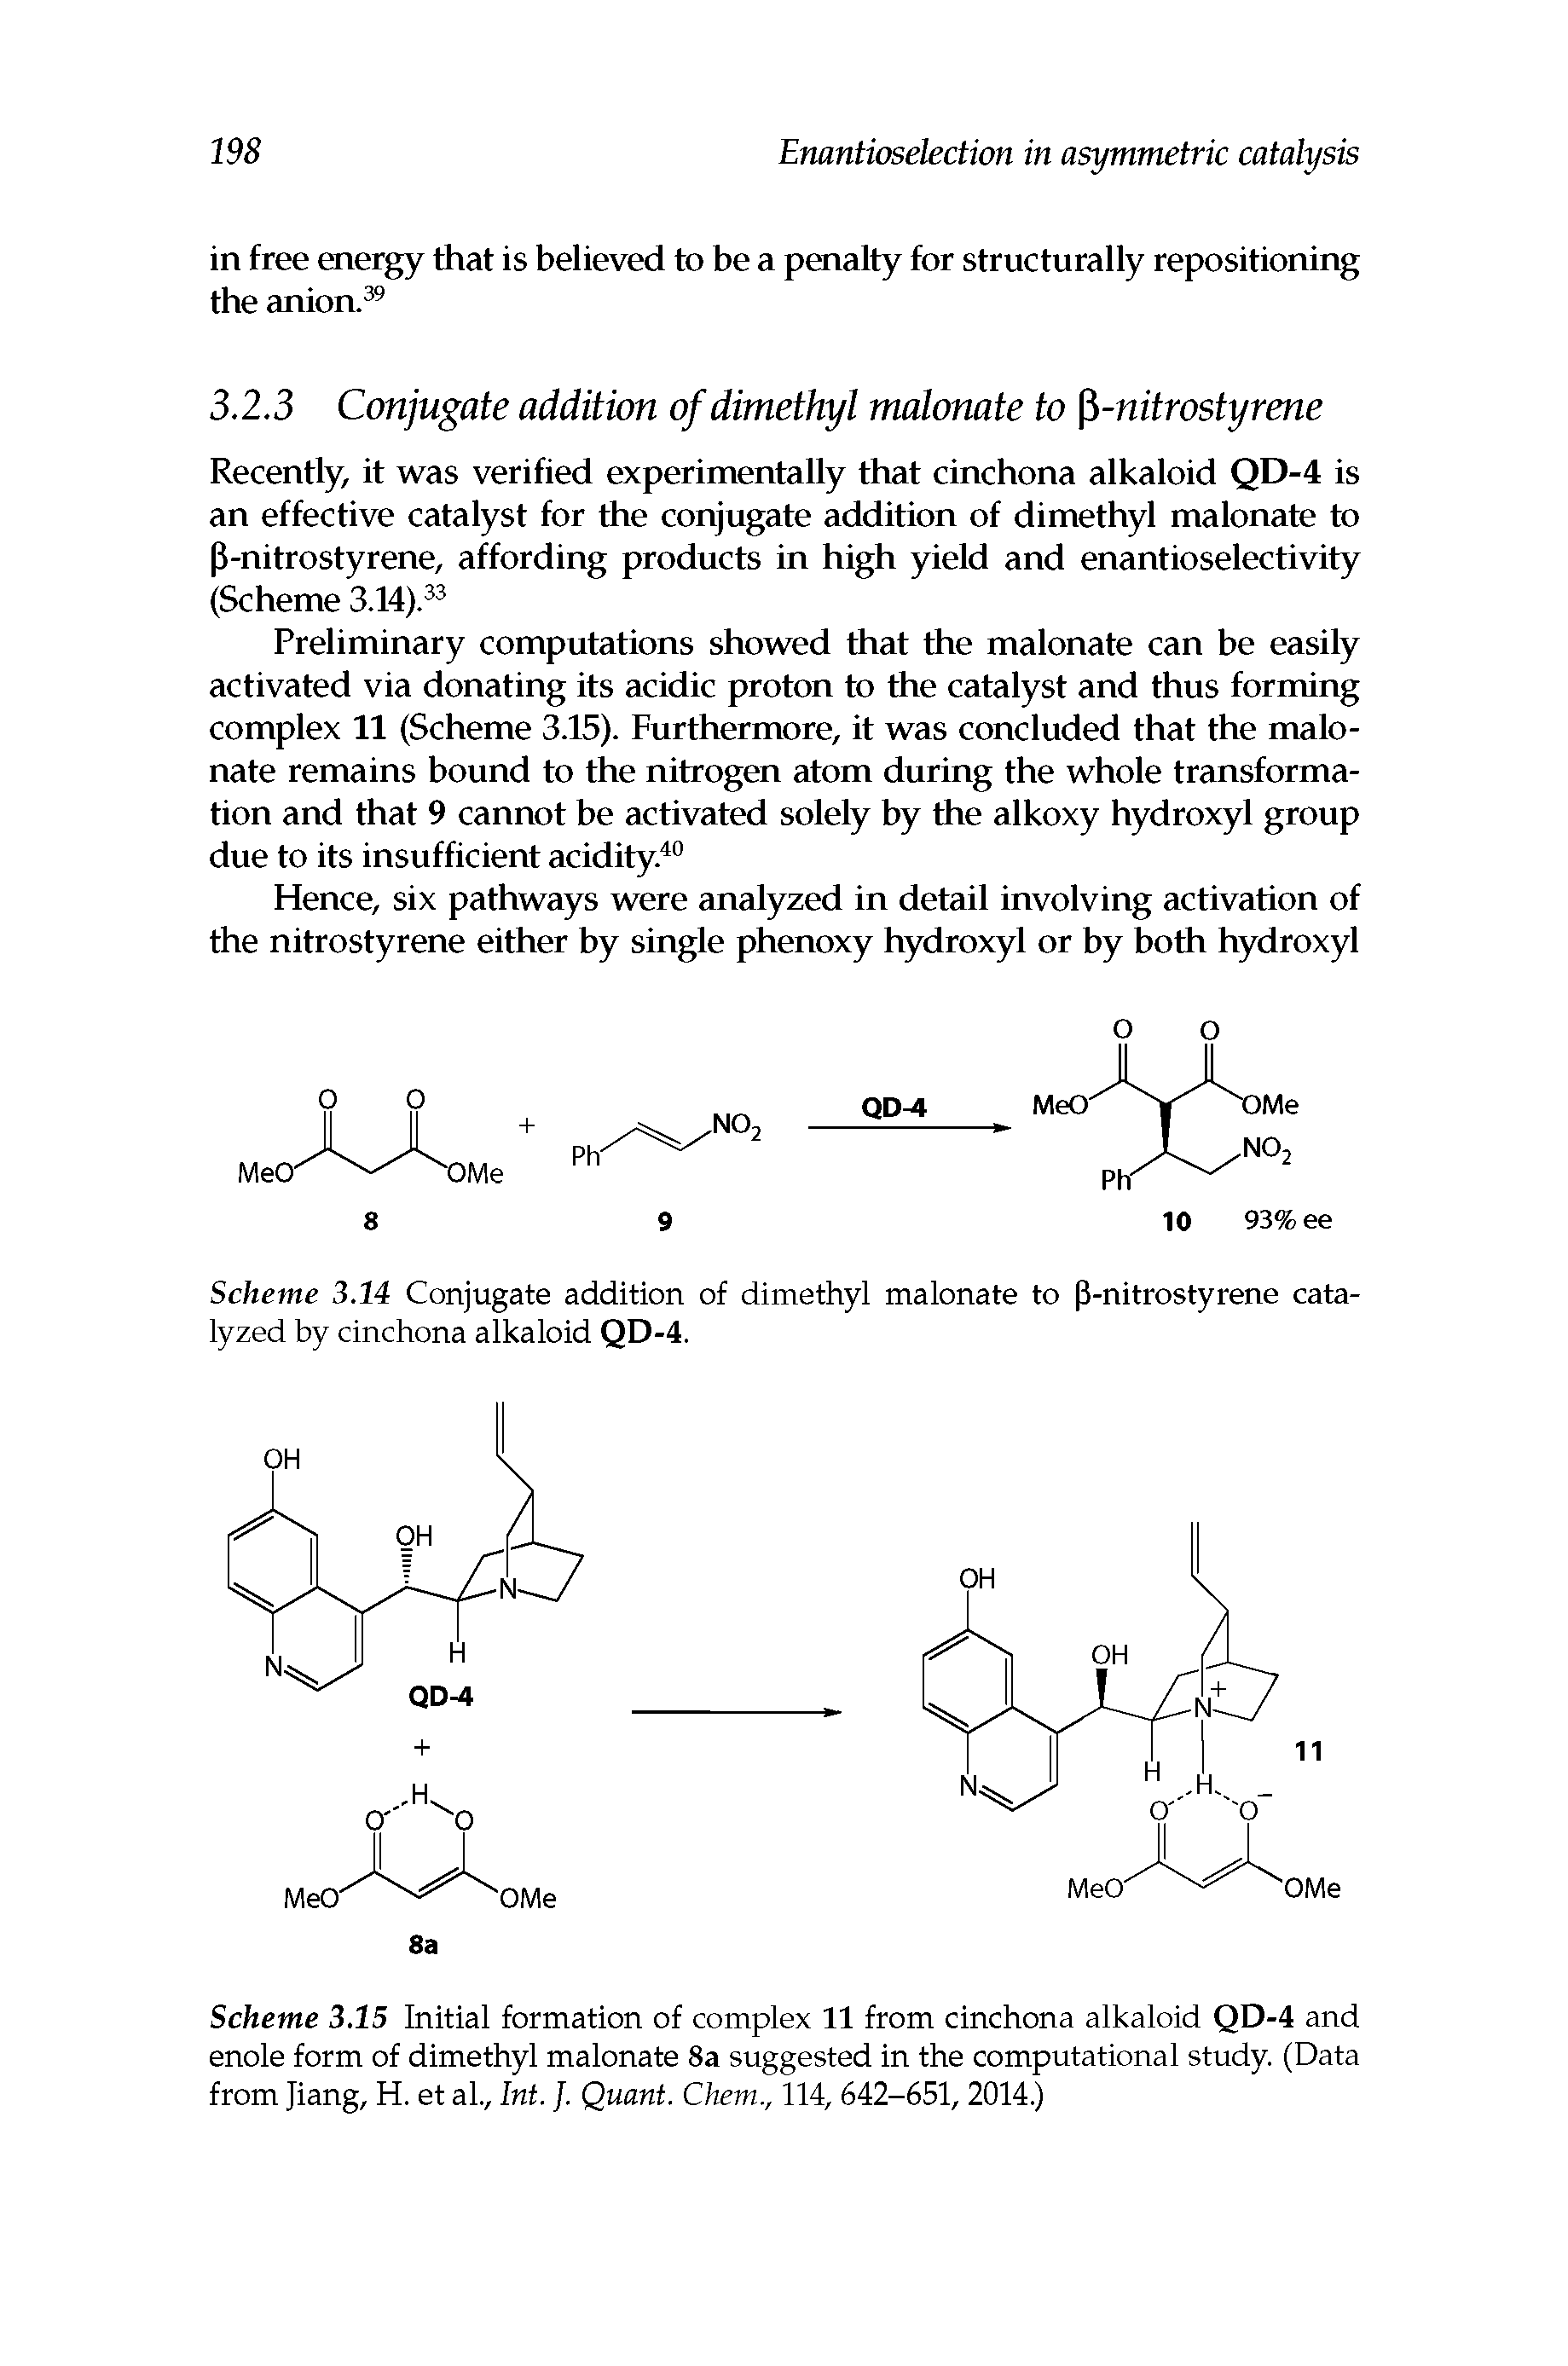 Scheme 3.15 Initial formation of complex 11 from cinchona alkaloid QD-4 and enole form of dimethyl malonate 8a suggested in the computational study. (Data from Jiang, H. et al., Int. J. Quant. Chem., 114,642-651,2014.)...